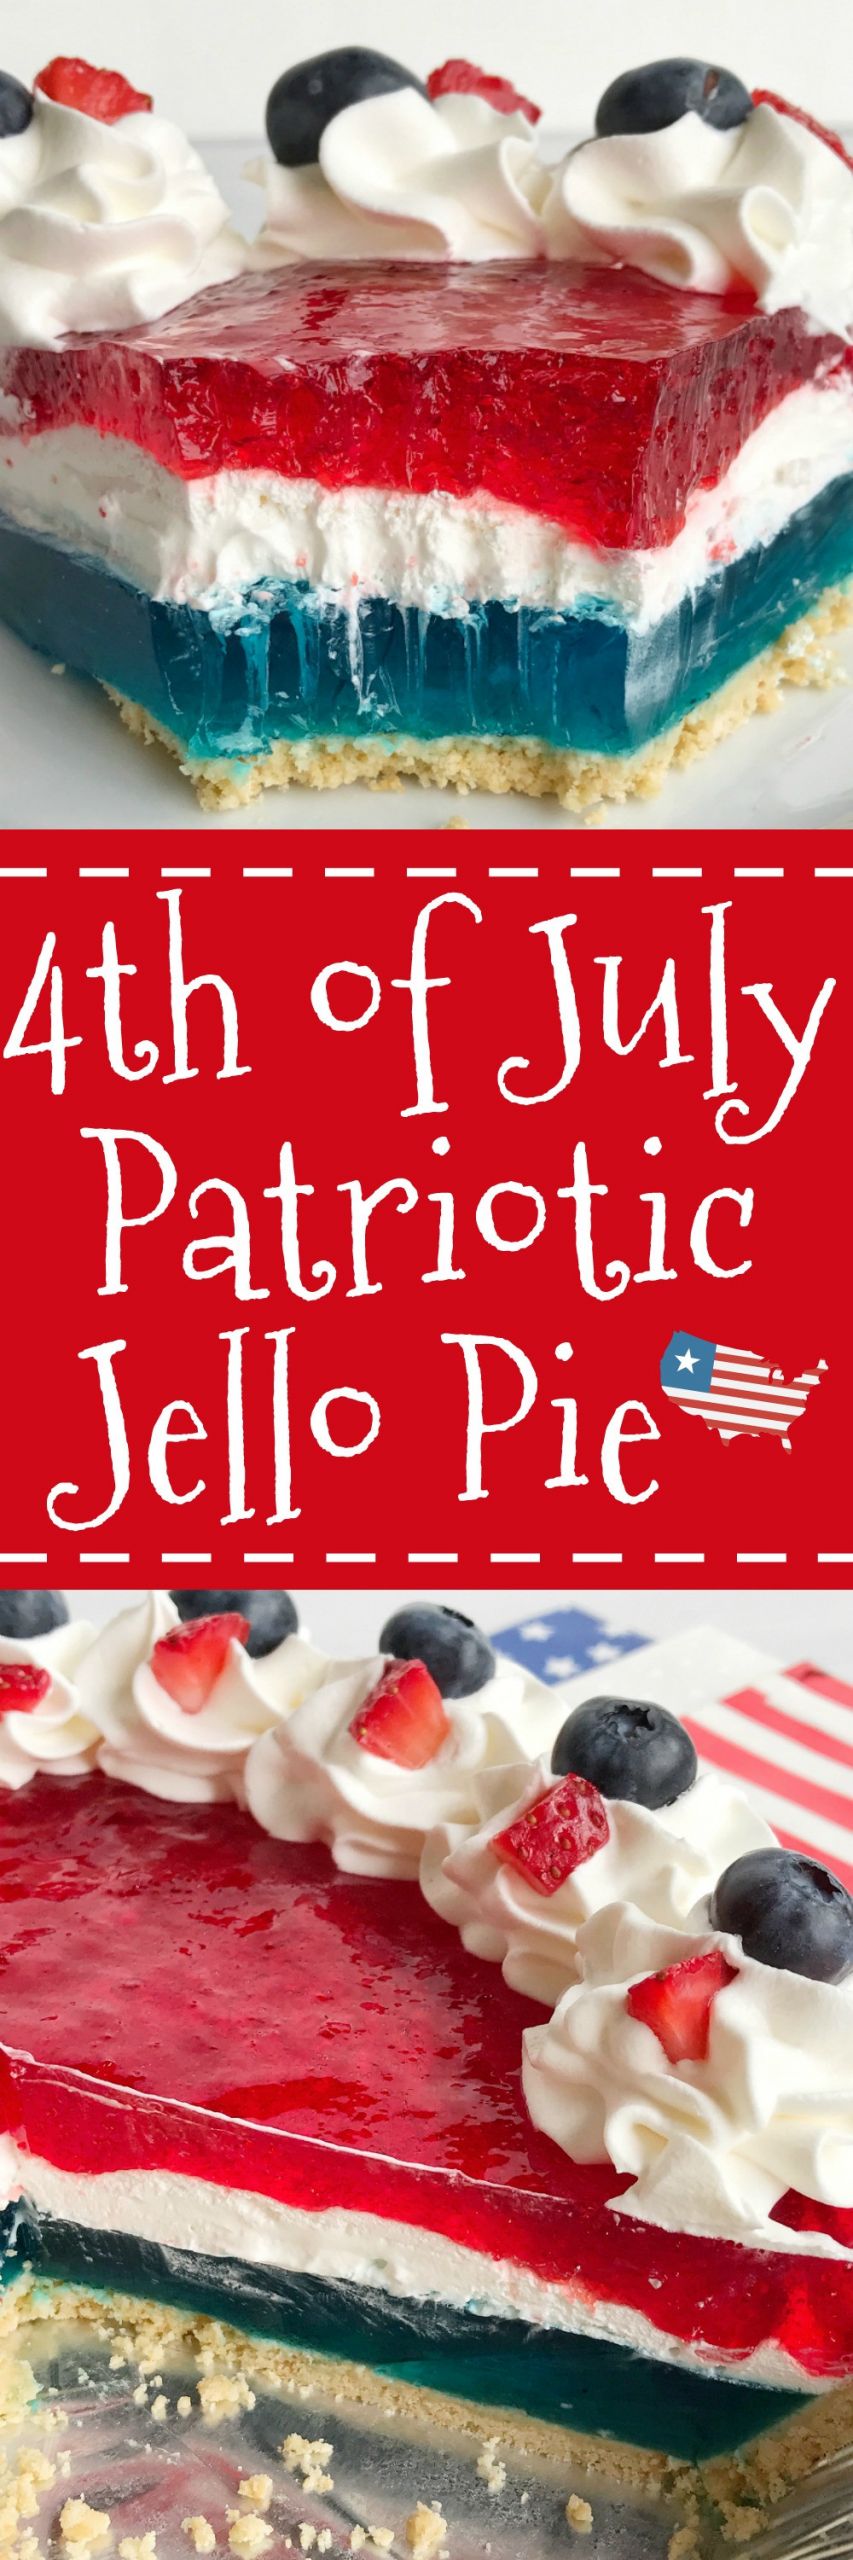 4Th Of July Jello Dessert
 4th of July Patriotic Jello Pie To her as Family